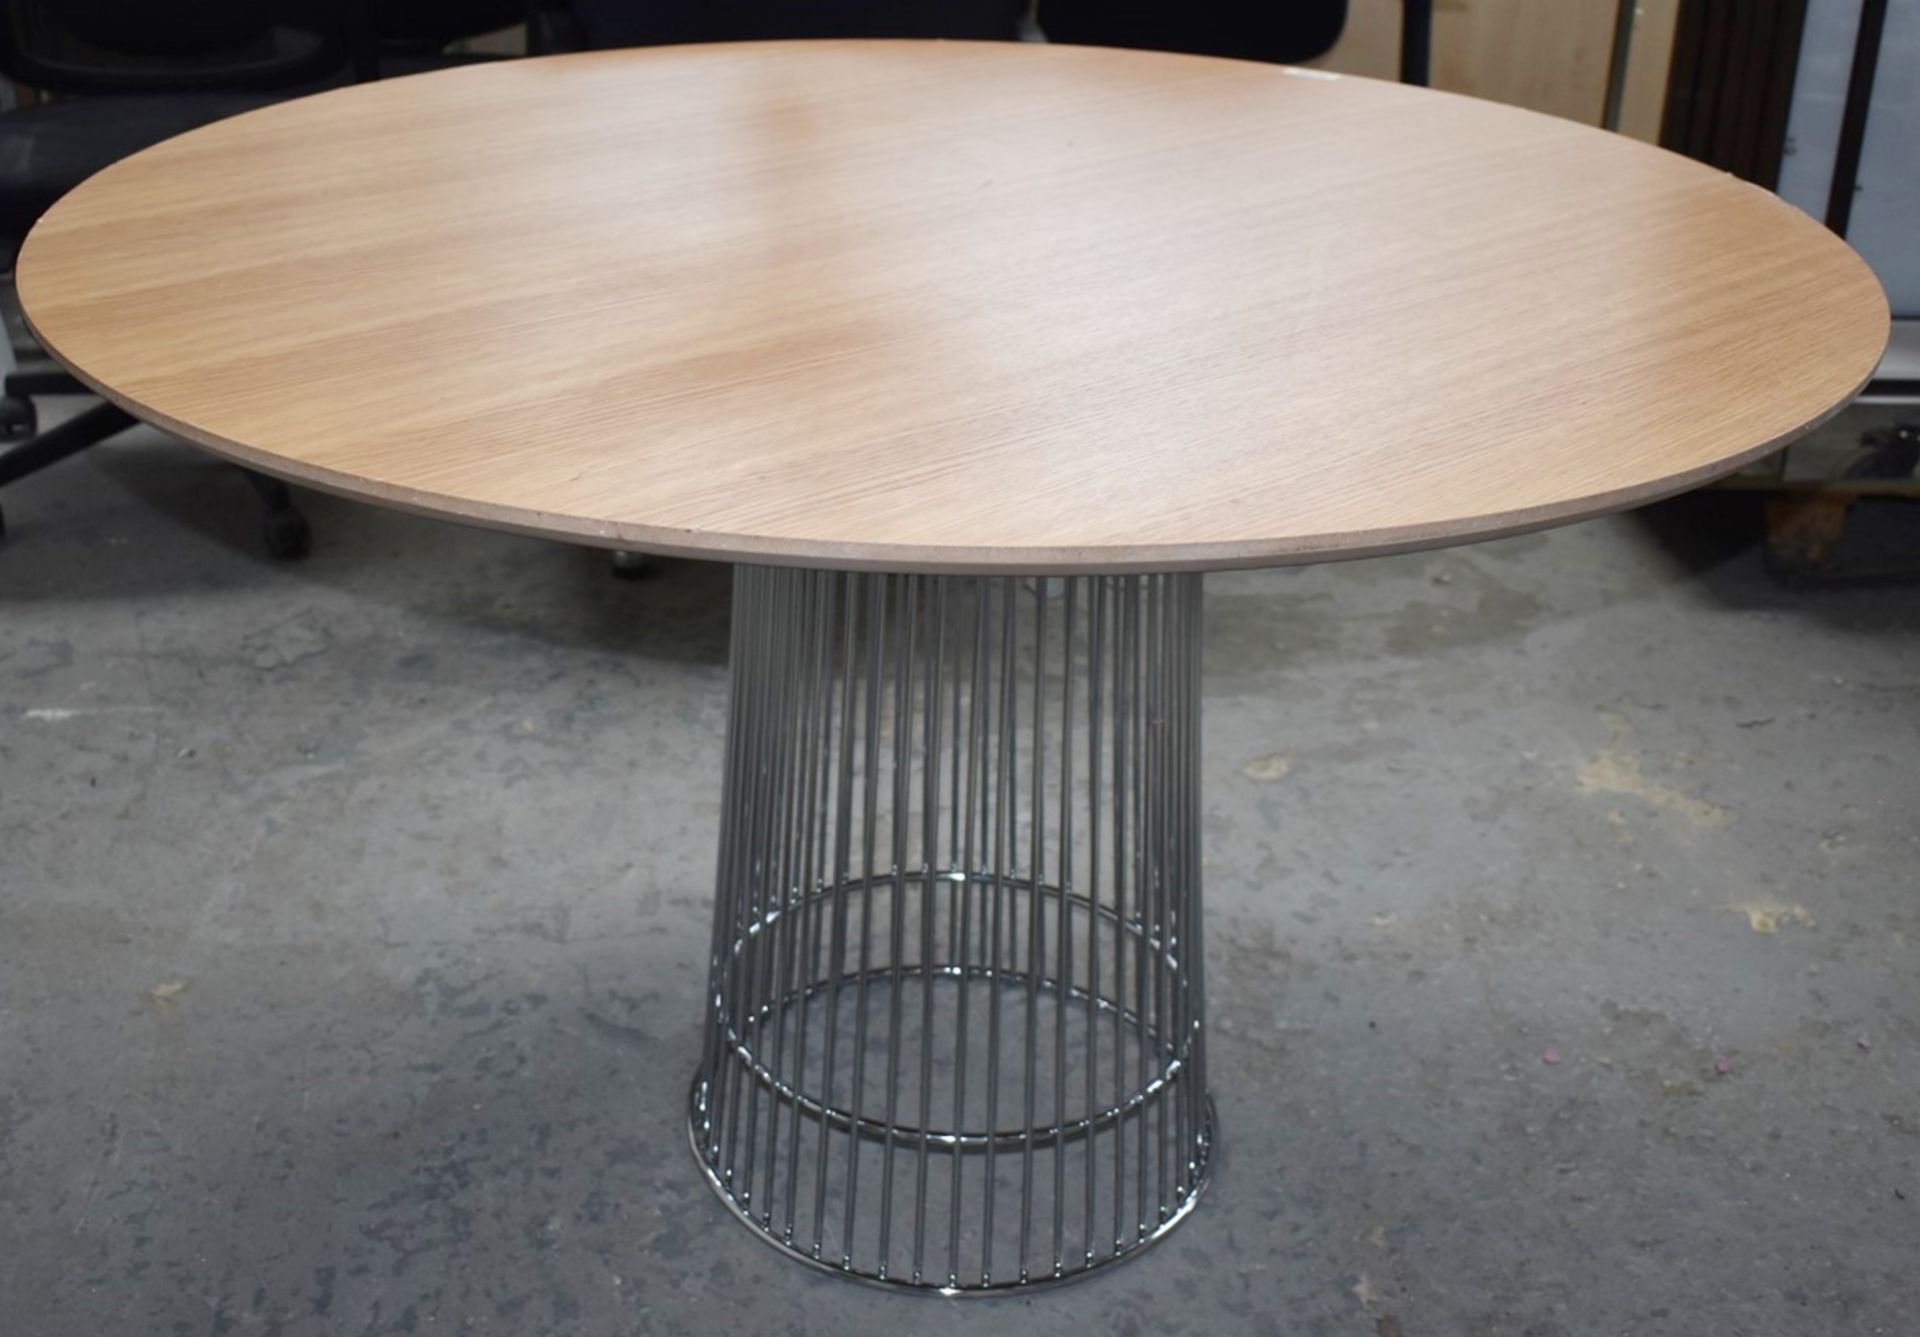 1 x Temahome Dining Table With a Large Round Table Top and Stylish Chrome Base - 150cm Diameter - Image 7 of 13